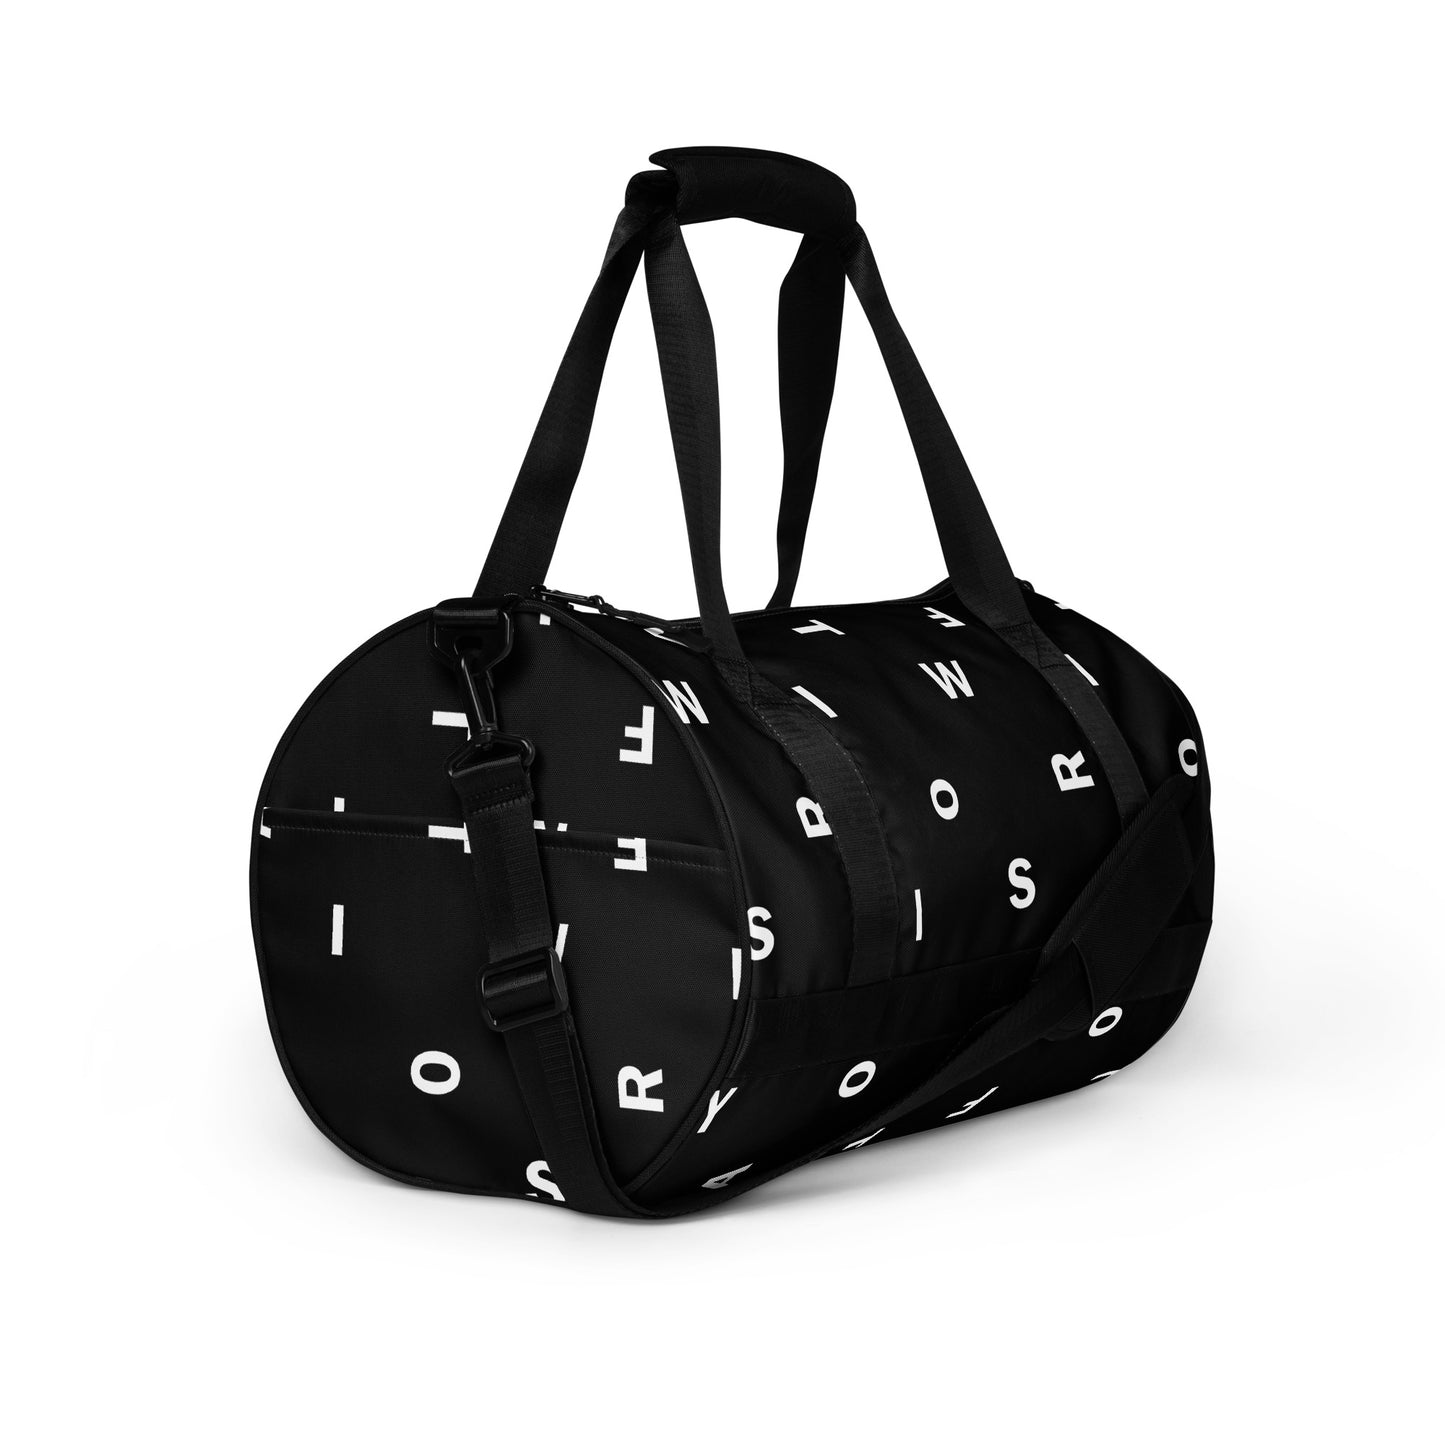 Letter Black - Inspired By Taylor Swift - Sustainably Made gym bag